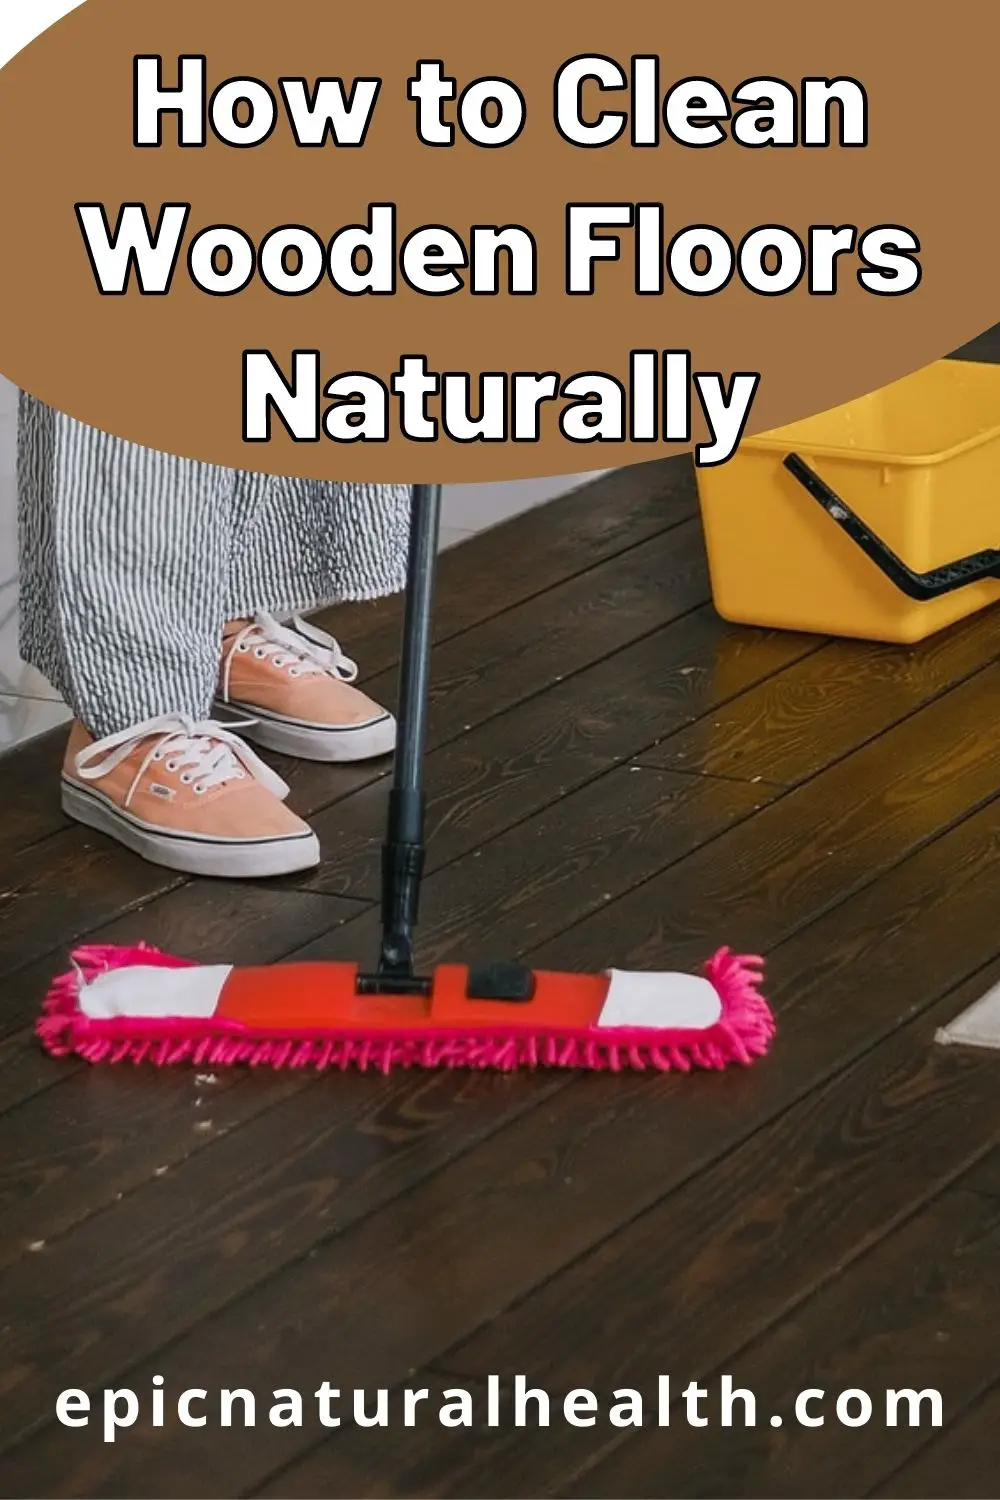 How to Clean Wooden Floors Naturally PIN